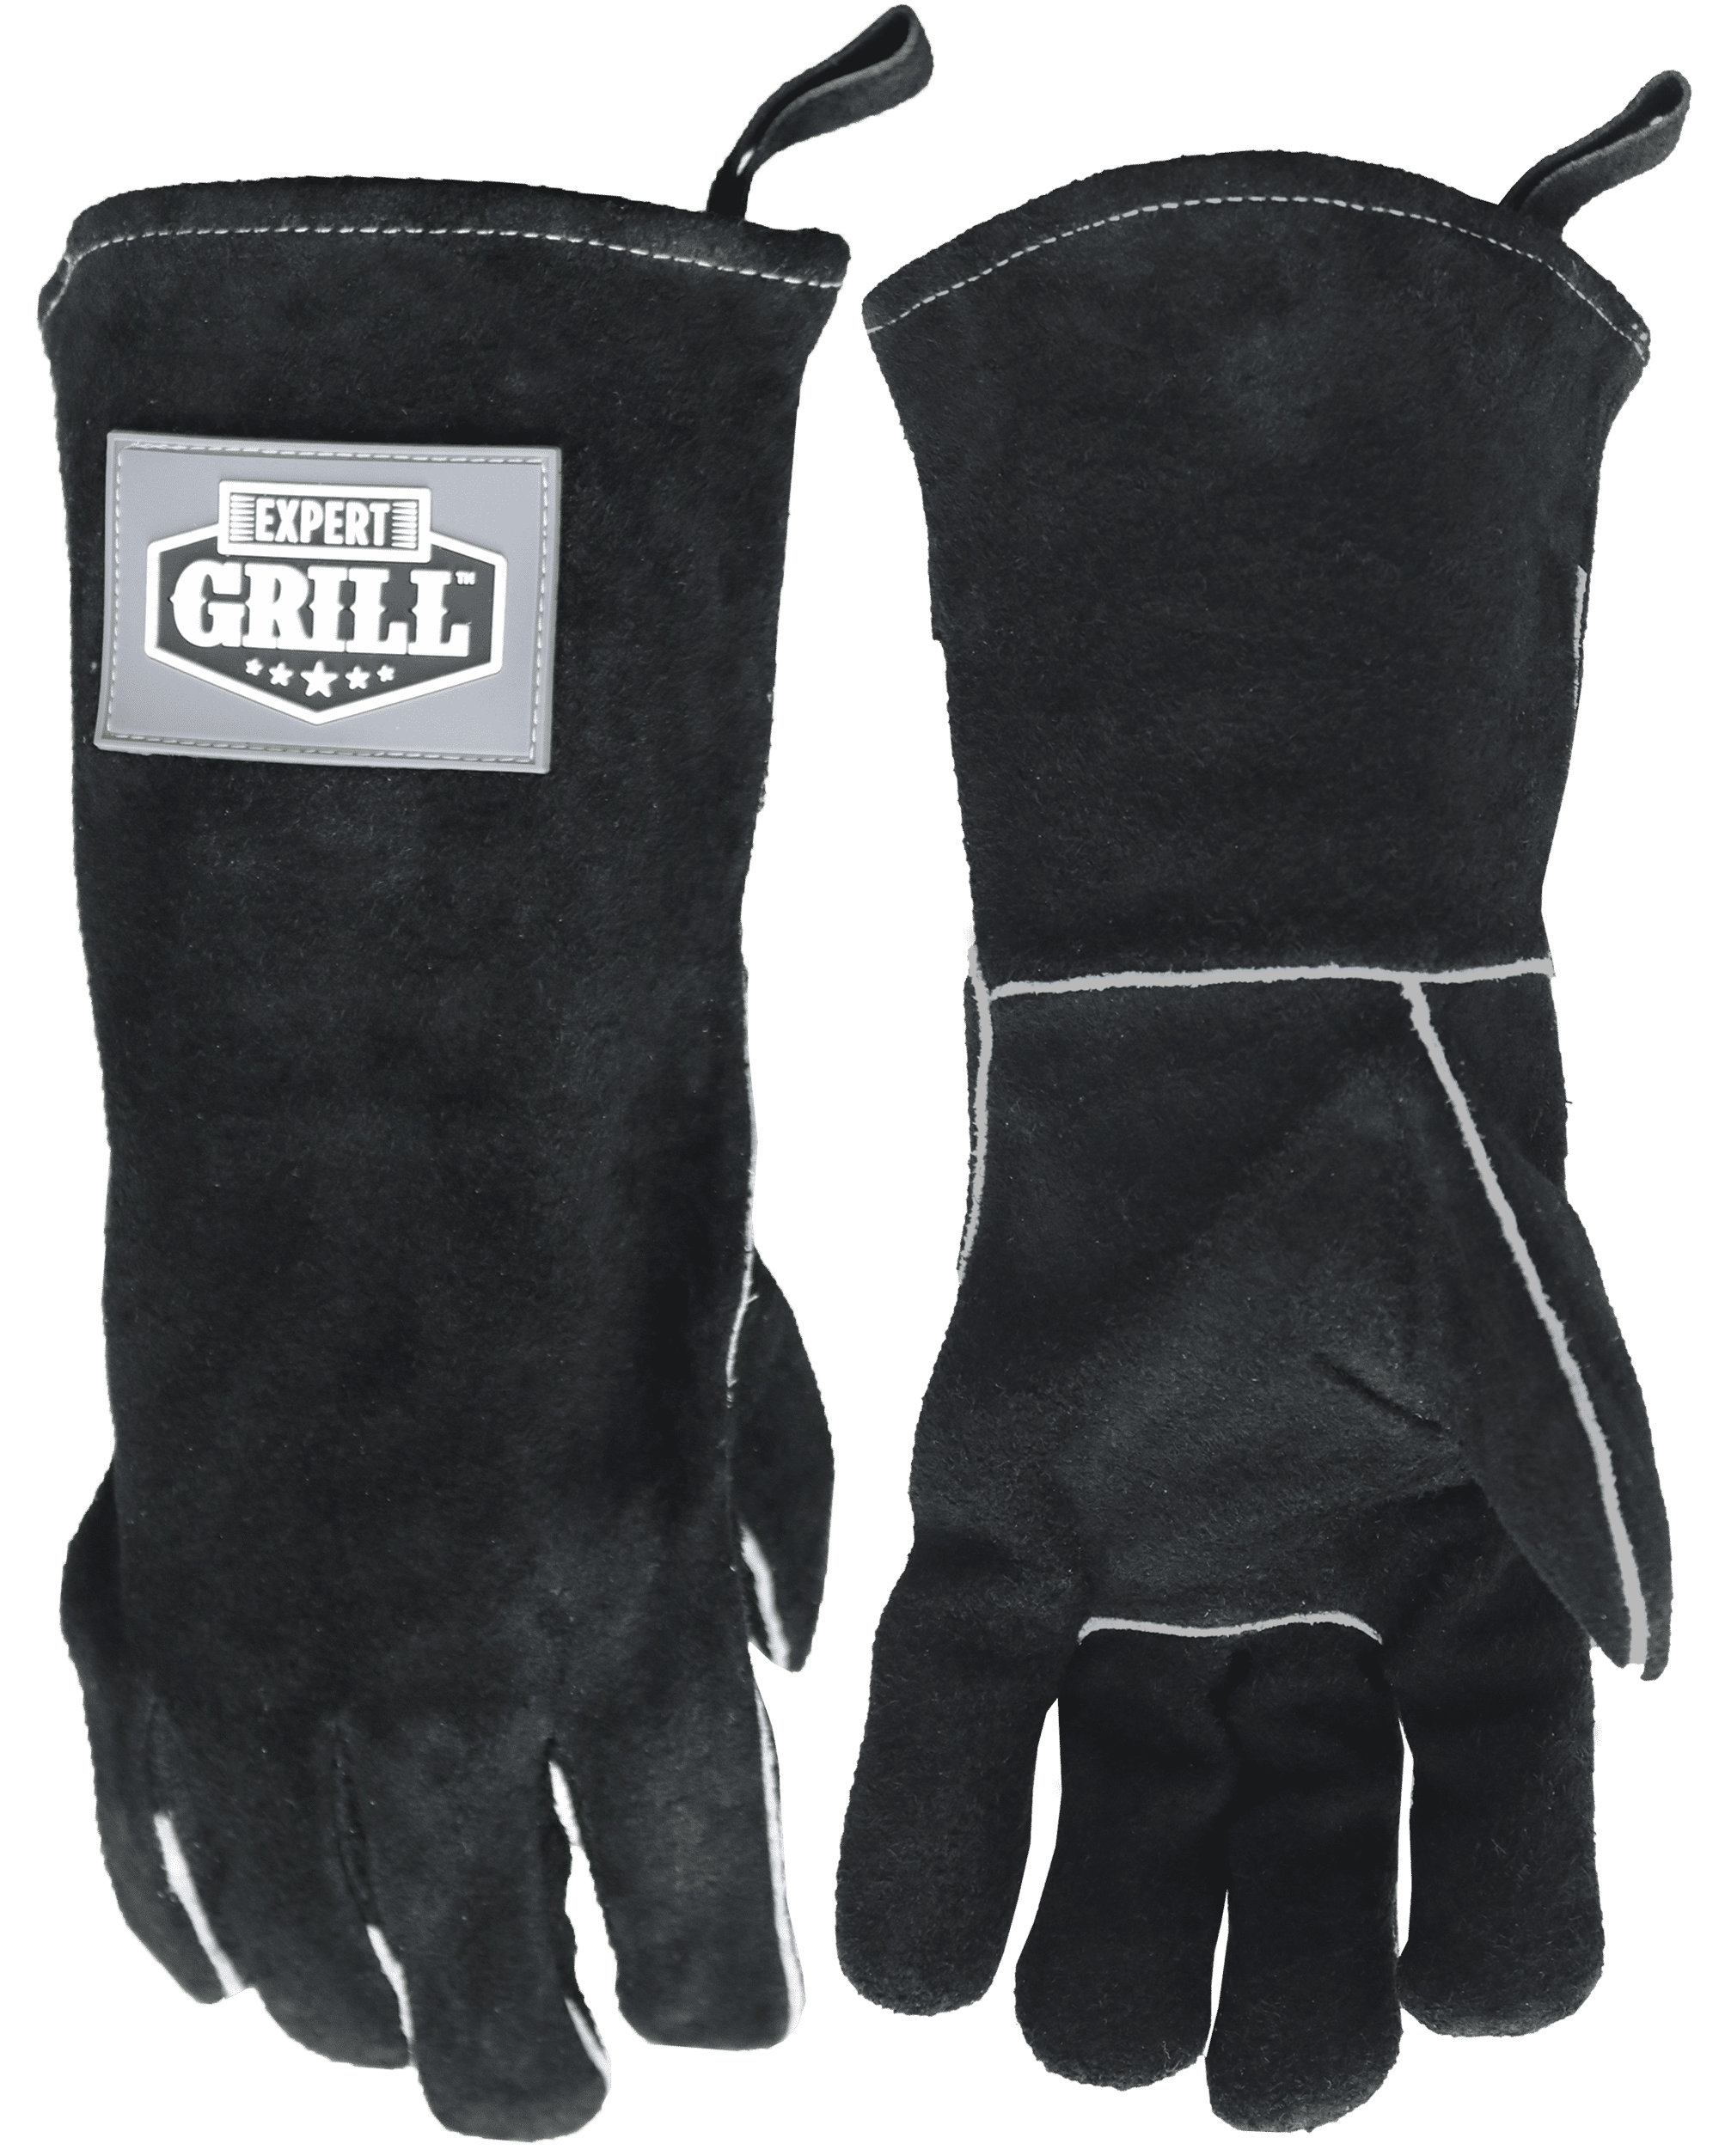 Expert Grill 14" Insulated Heat Resistant Leather BBQ Gloves, Black Color